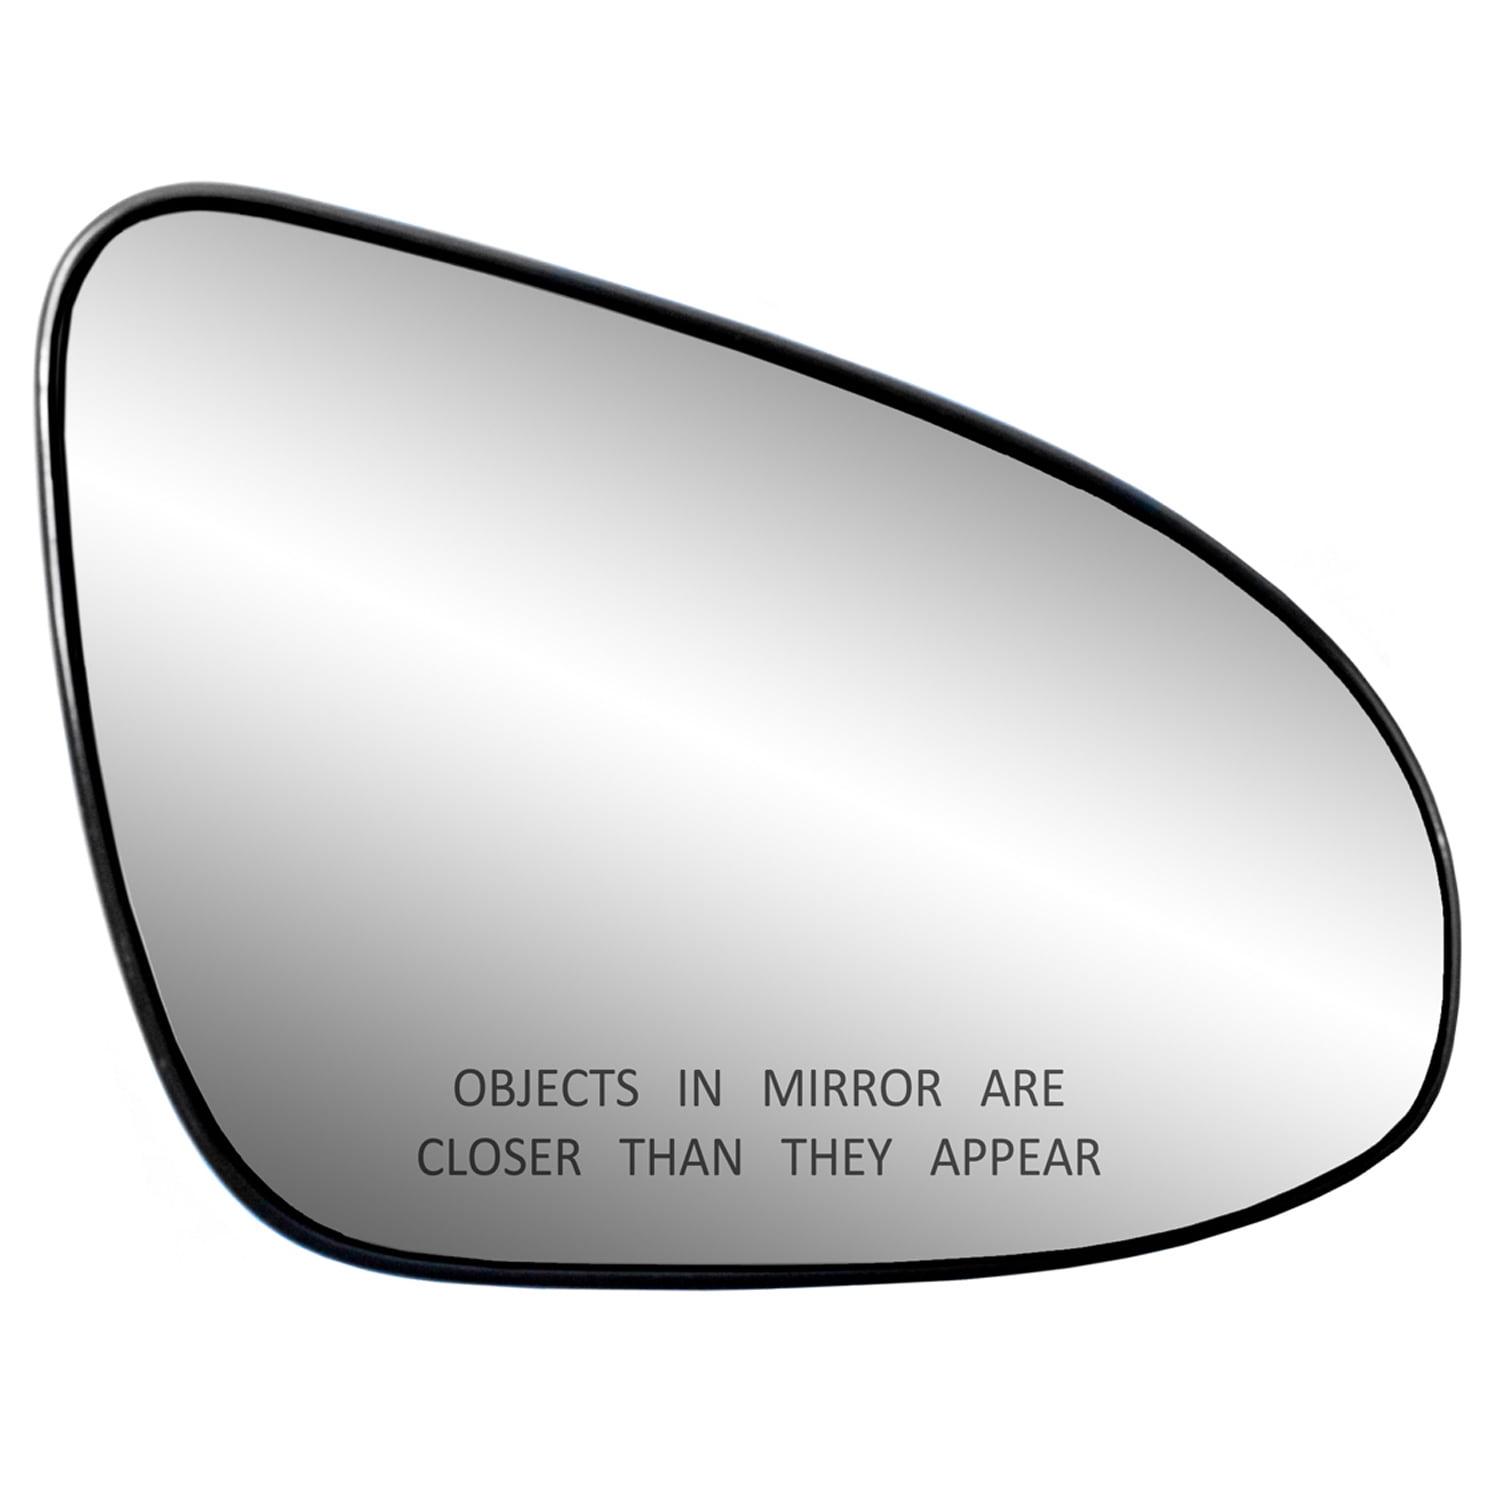 For TOYOTA AVENSIS 2006-2008 LEFT SIDE HEATED WIDE ANGLE MIRROR GLASS plate 